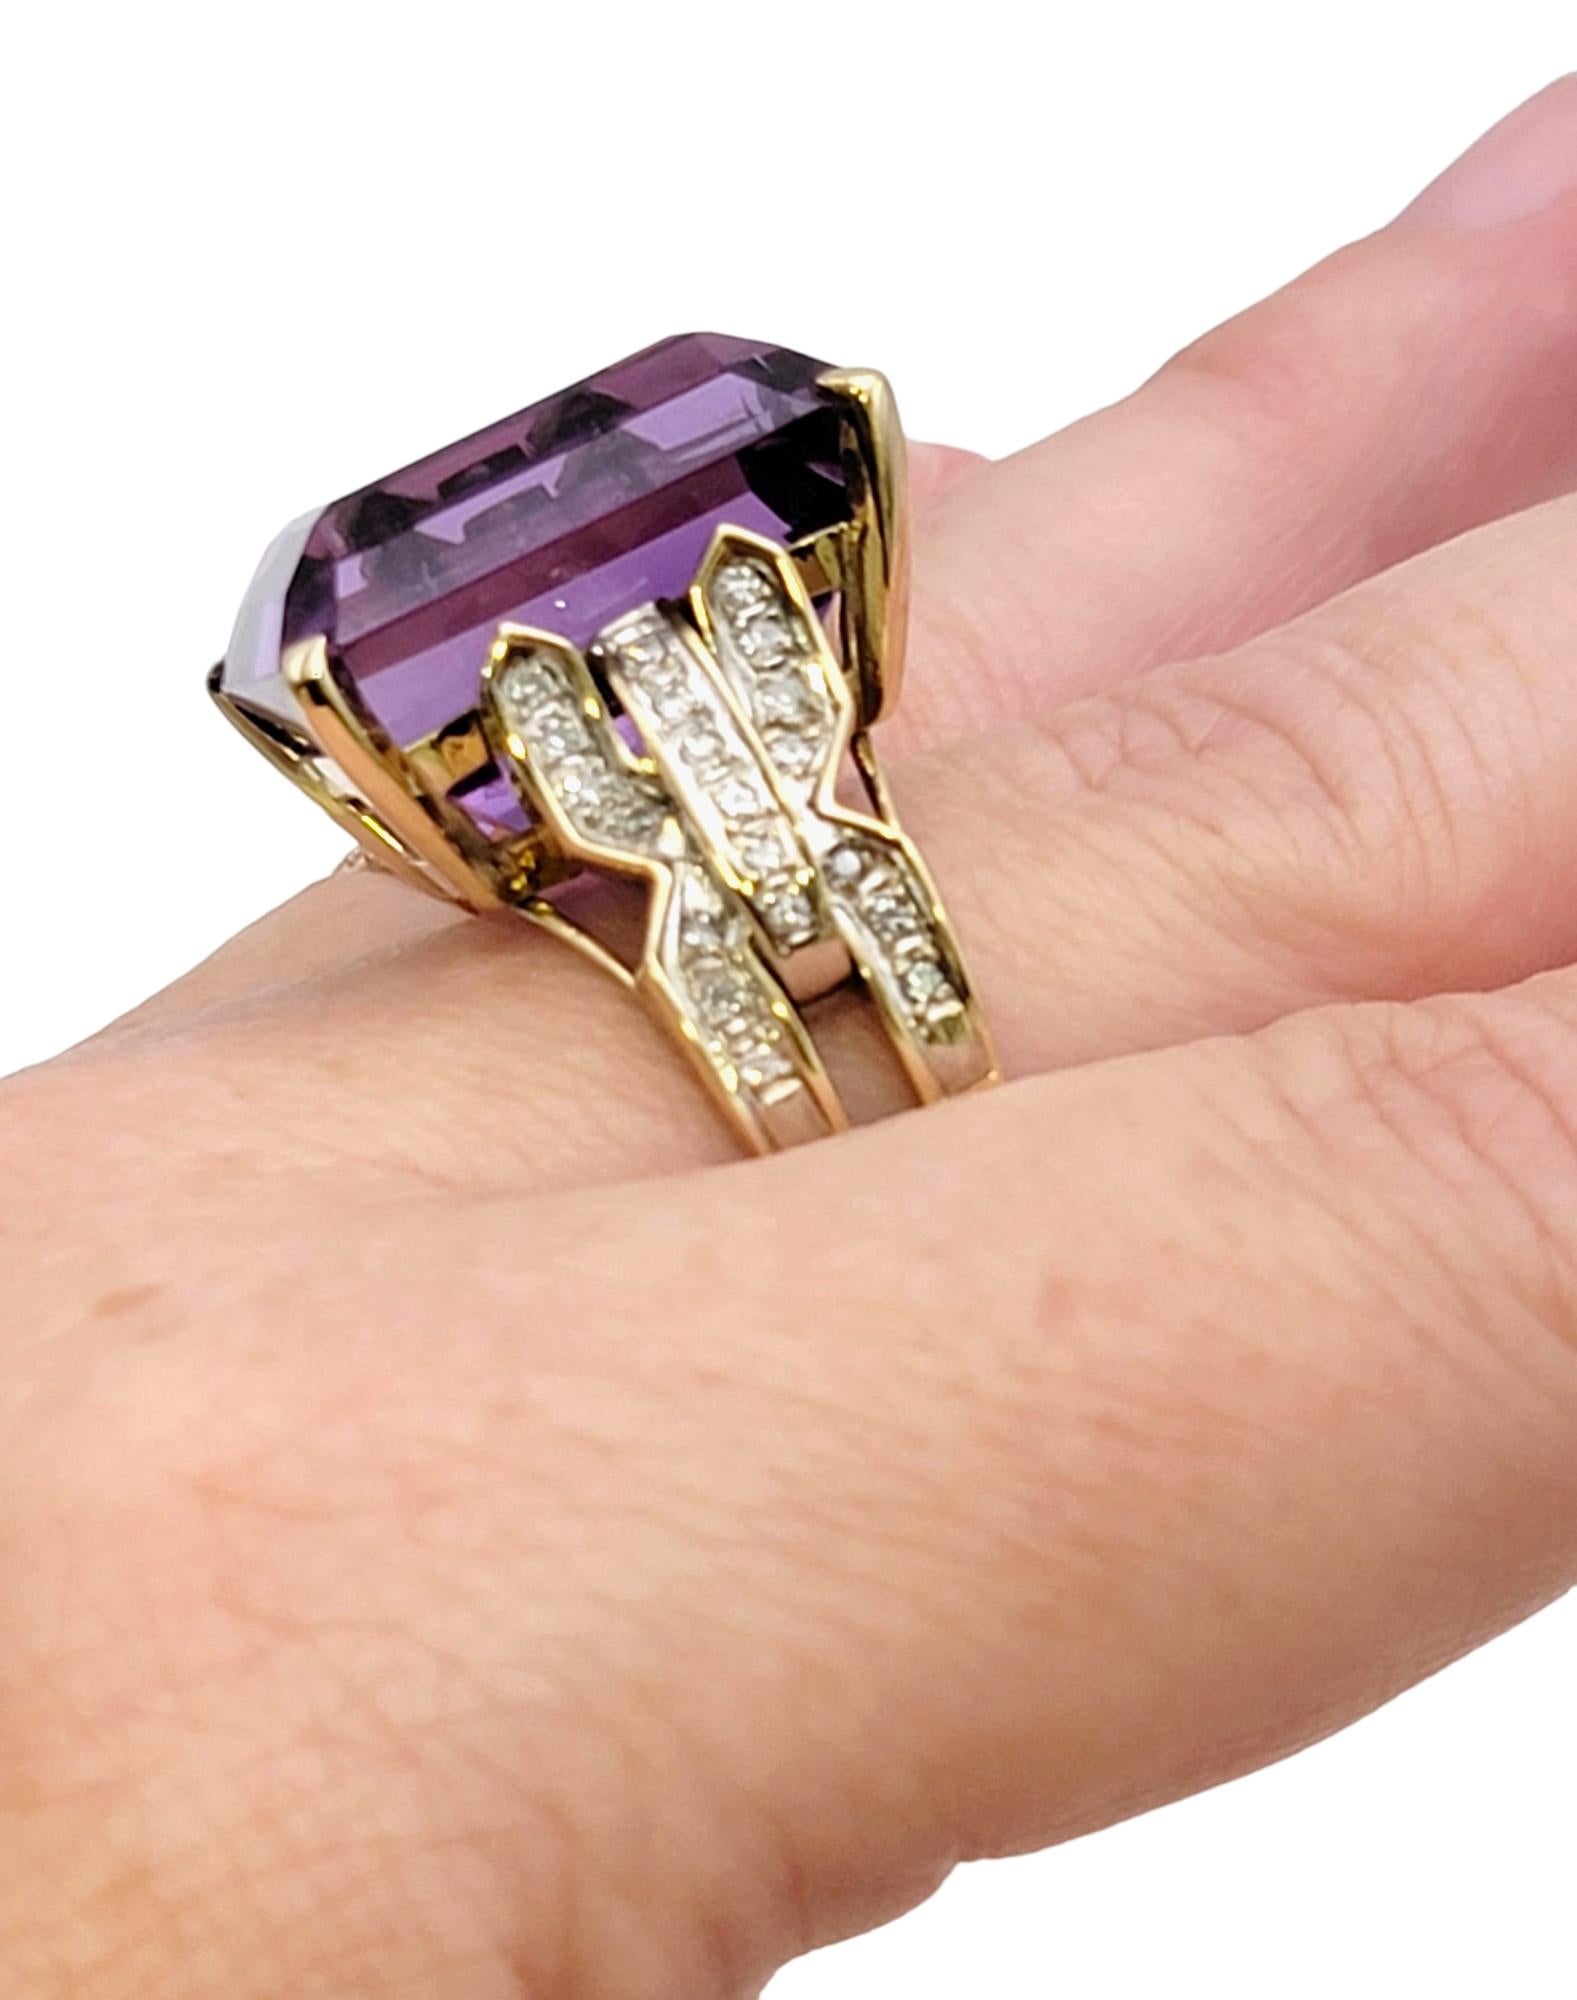 Huge 34.85 Carat Emerald Cut Amethyst Cocktail Ring with Side Diamond Detailing For Sale 8